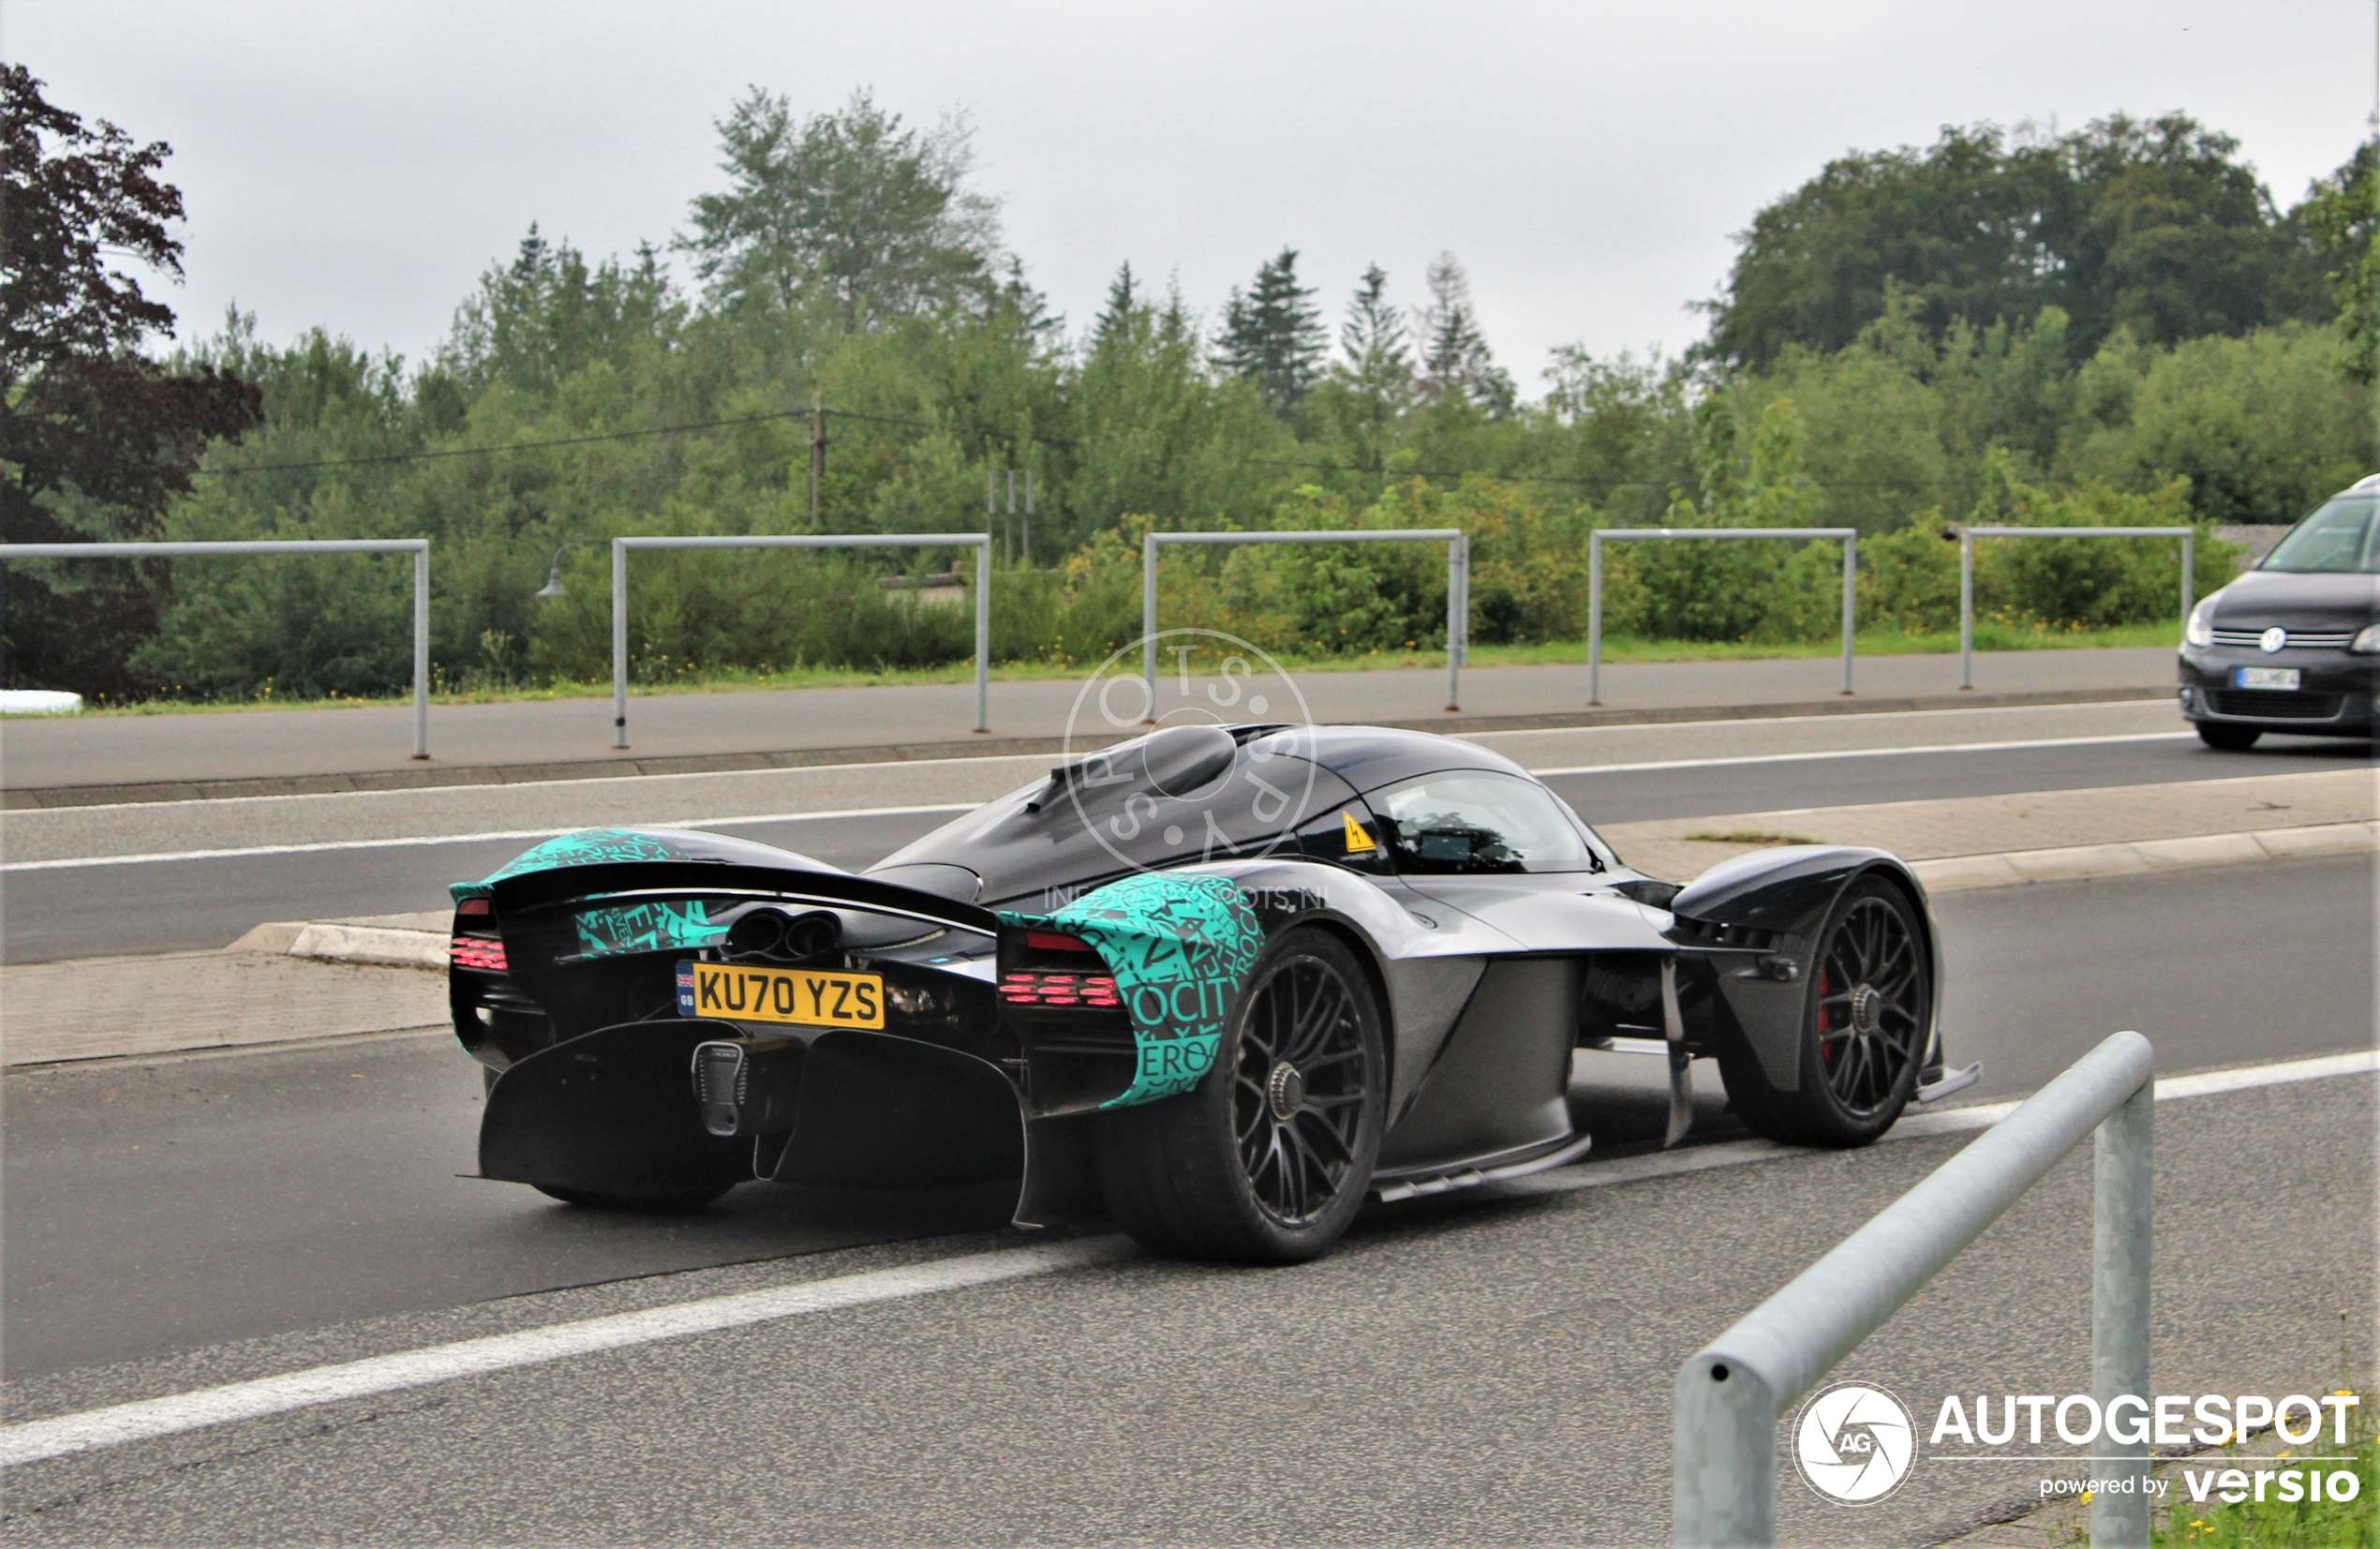 A Valkyrie test vehicle is discovered at the Nürburgring